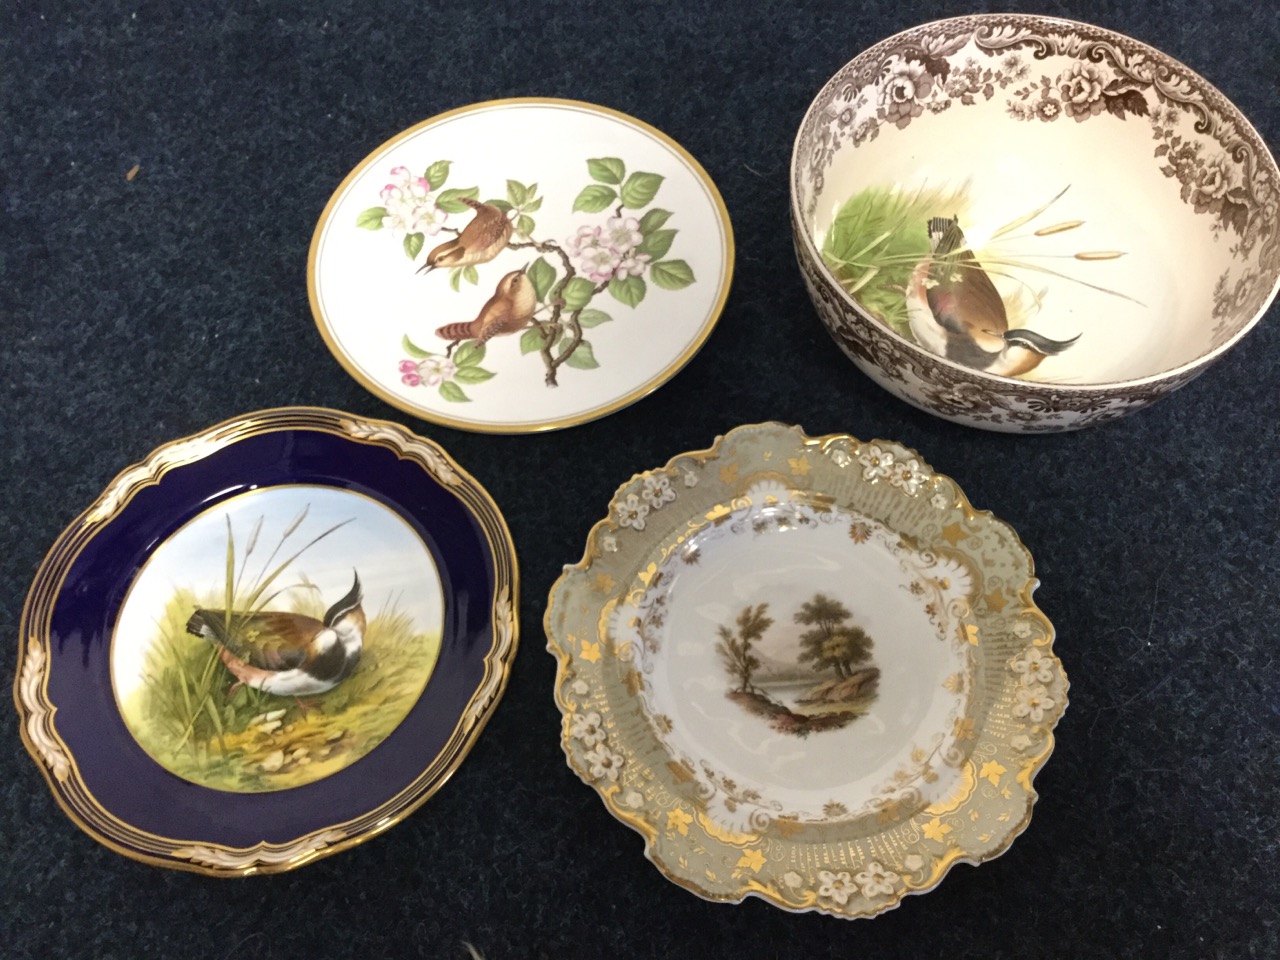 A nineteenth century Davenport plate painted with a country river landscape scene, with floral